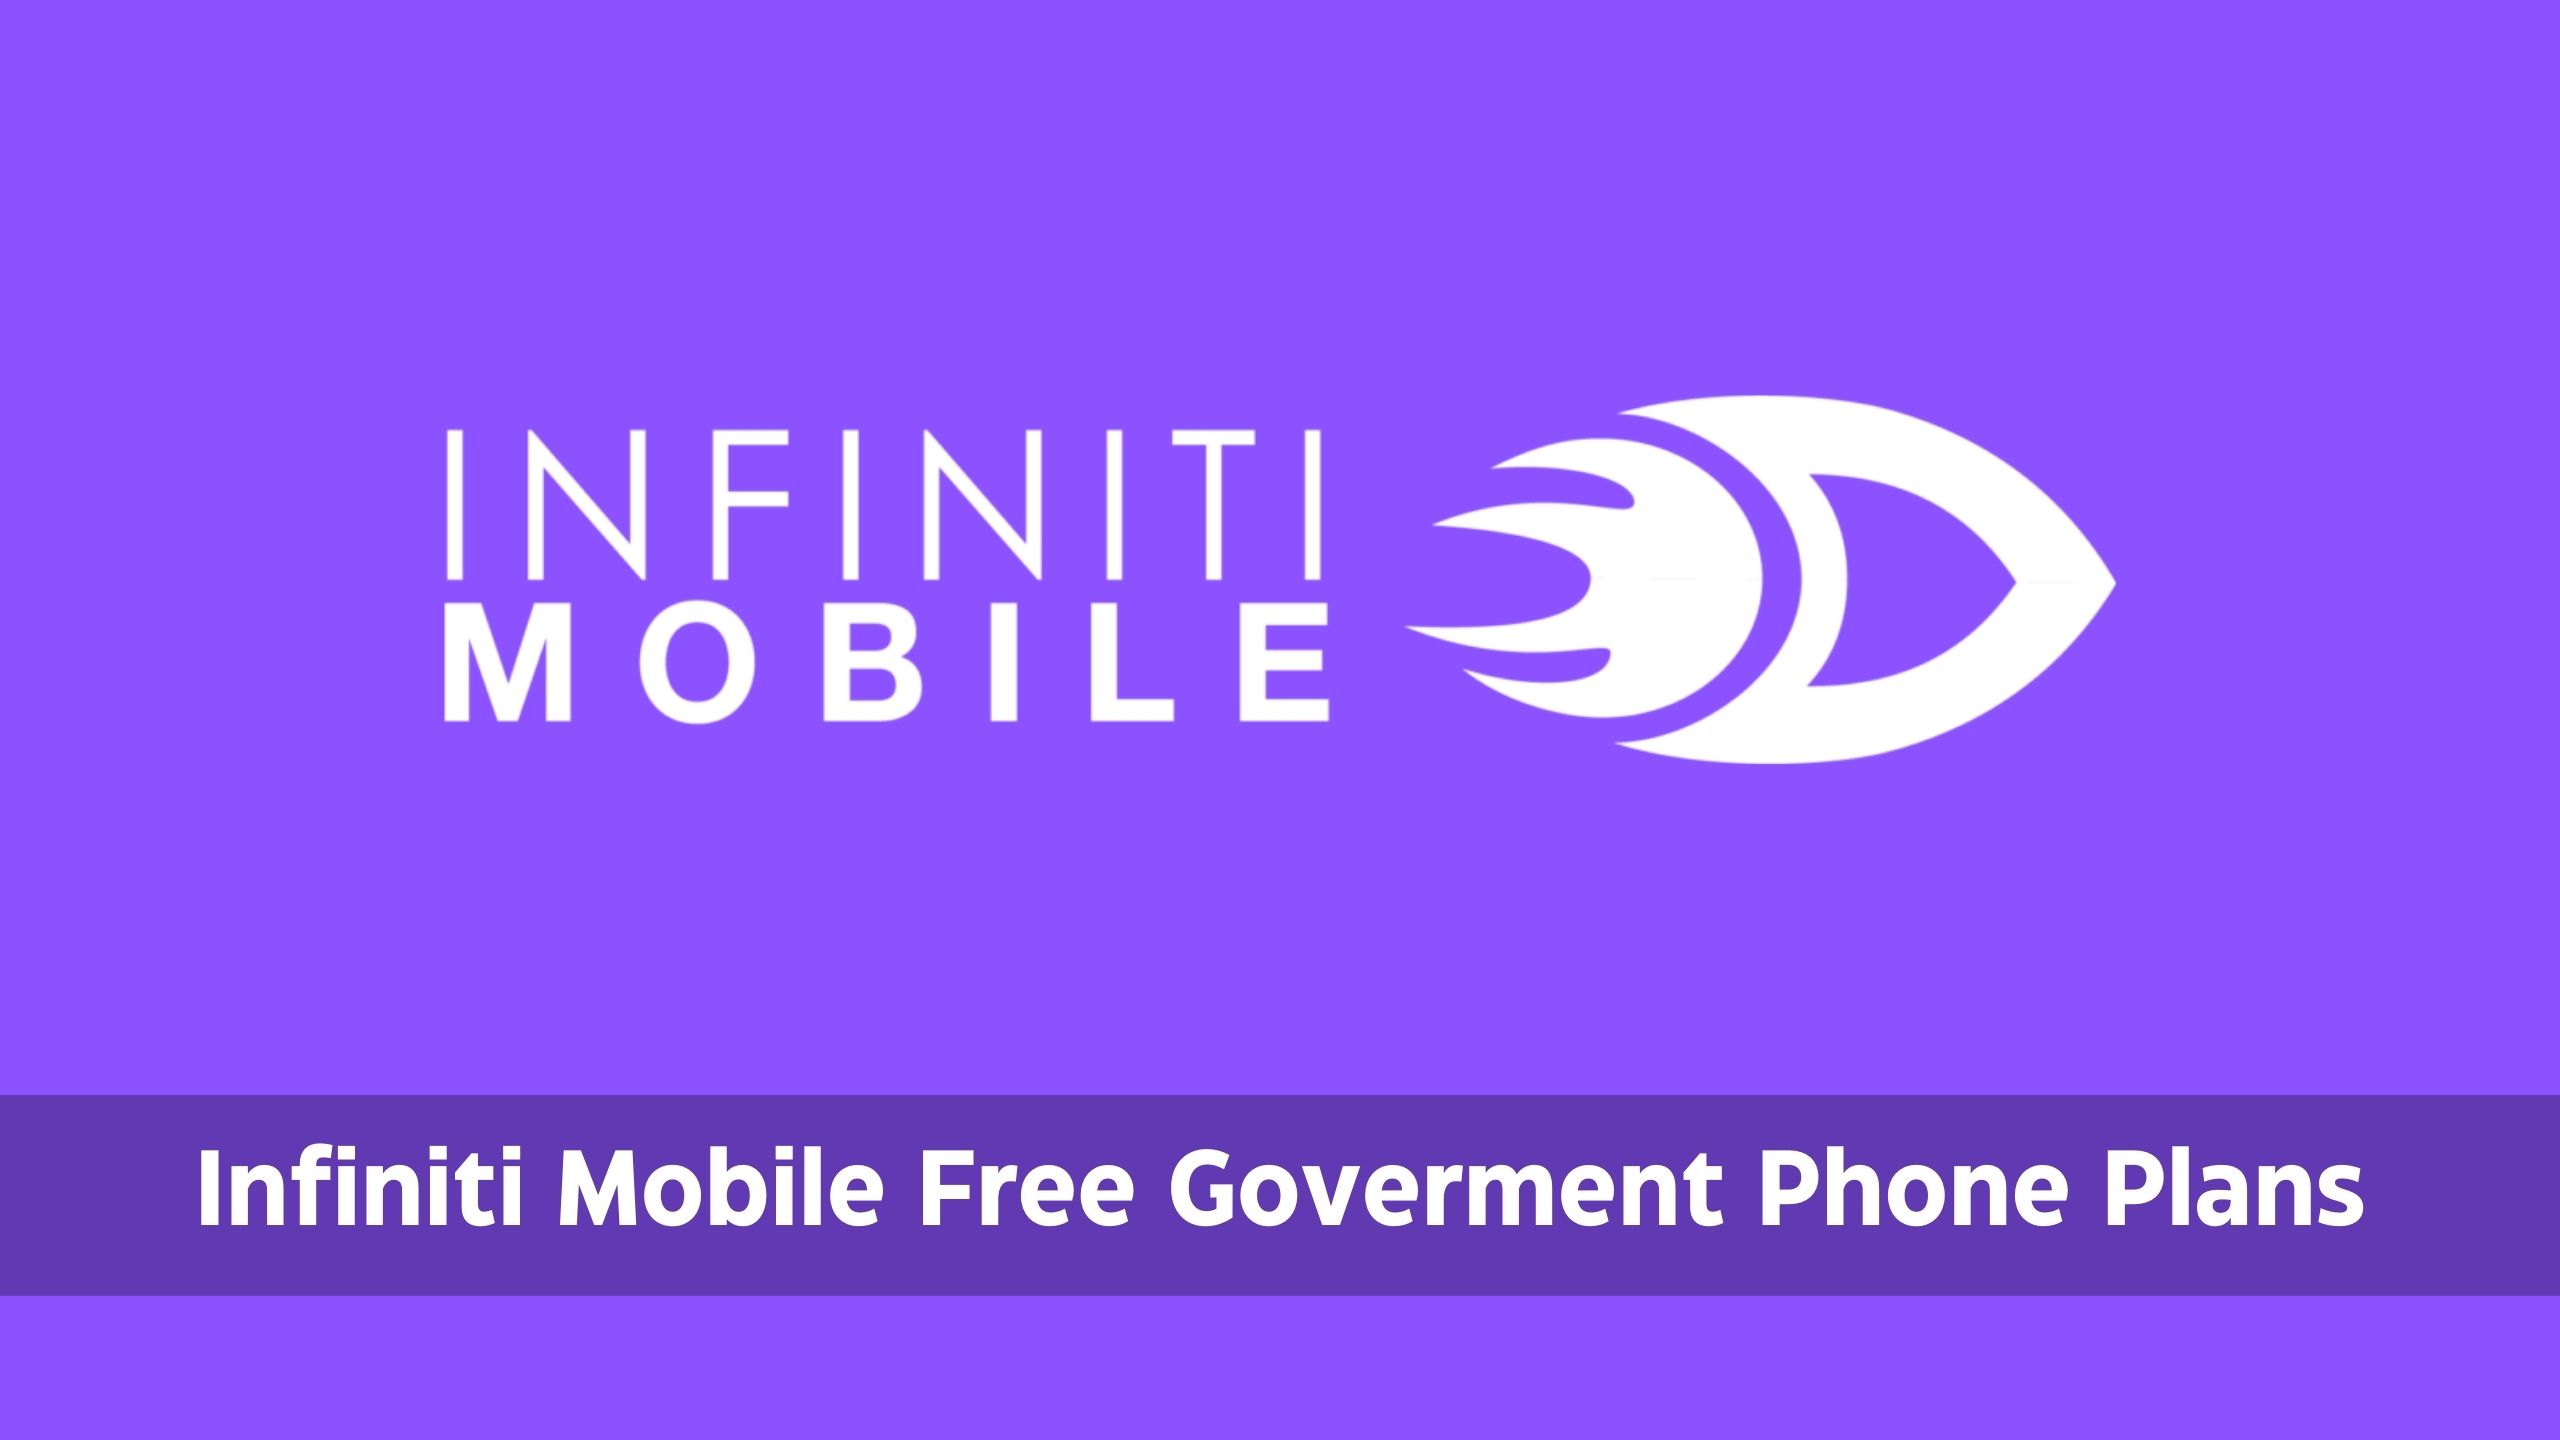 Infiniti Mobile Free Government Phone Plans | Lifeline, ACP Eligibility & Application Guide